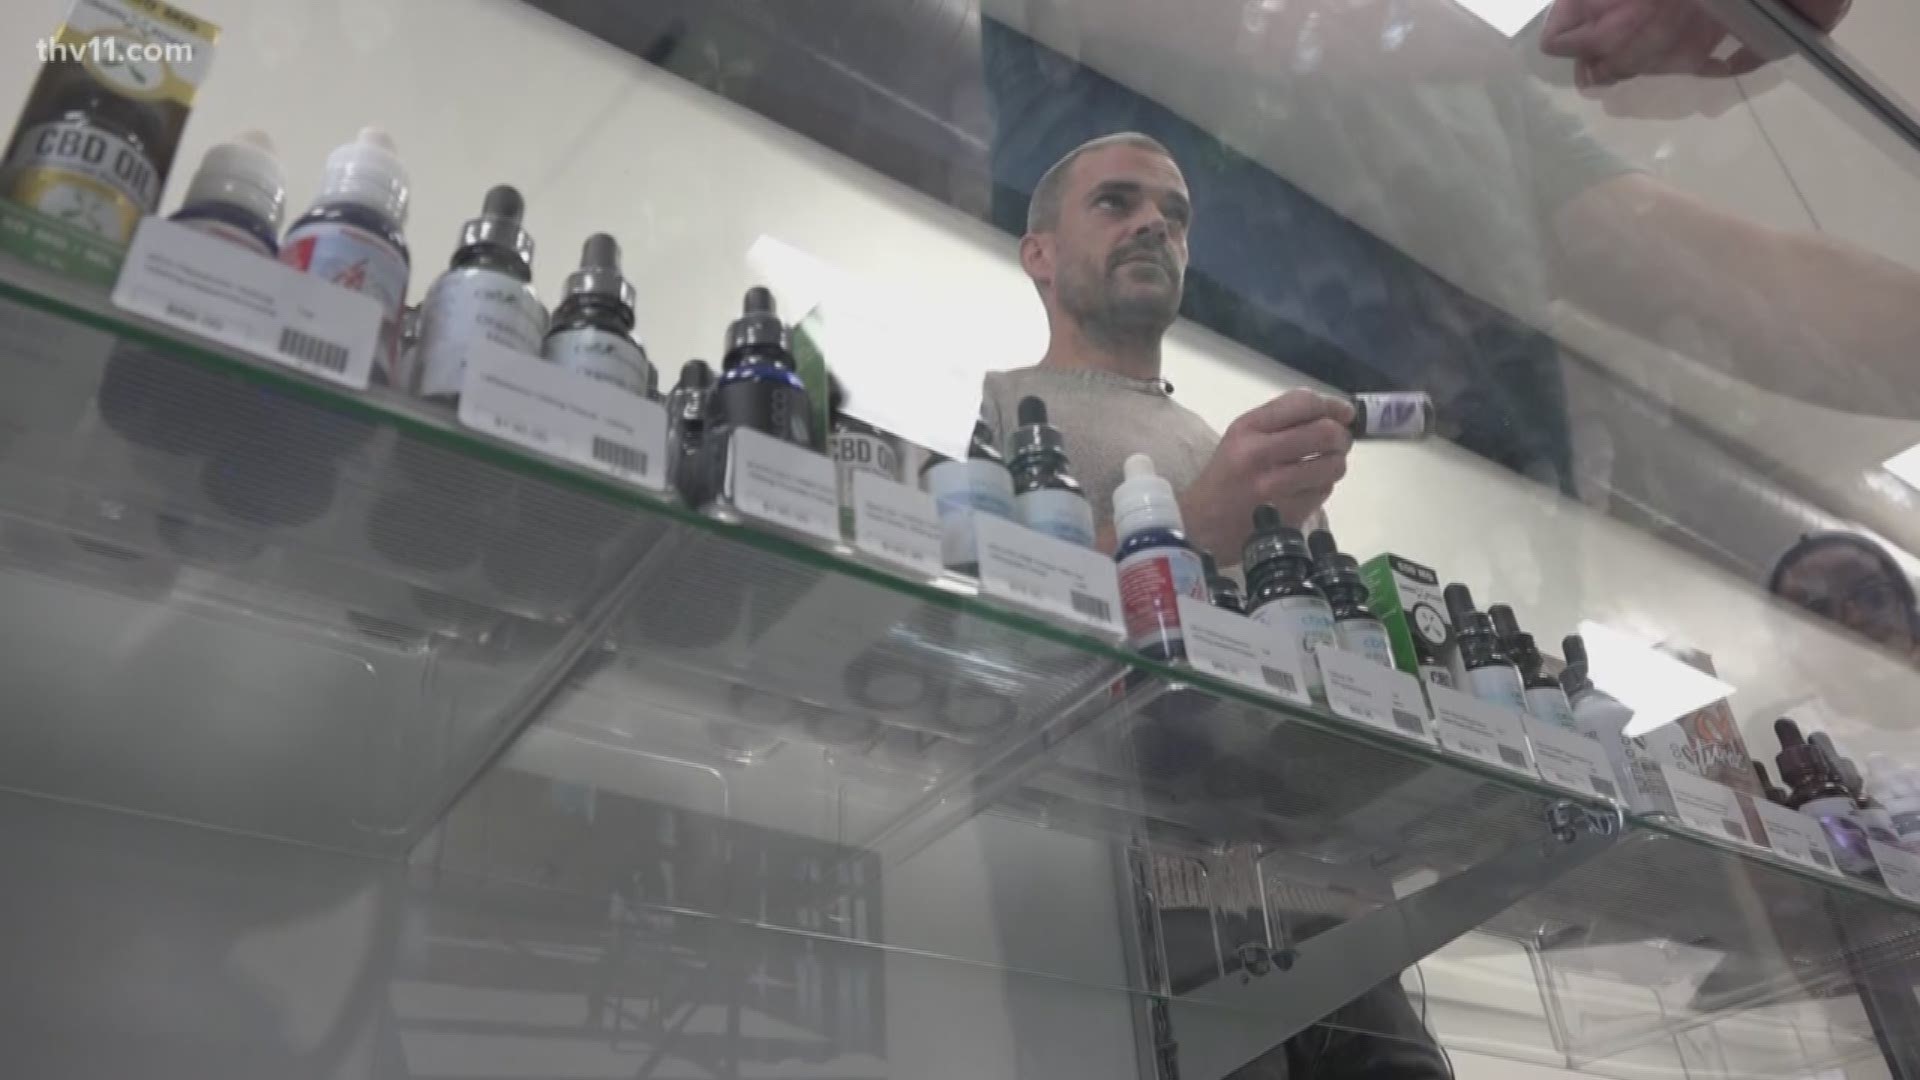 The growing popularity of one part of the cannabis industry, which doesn't involve pot, has users asking questions.